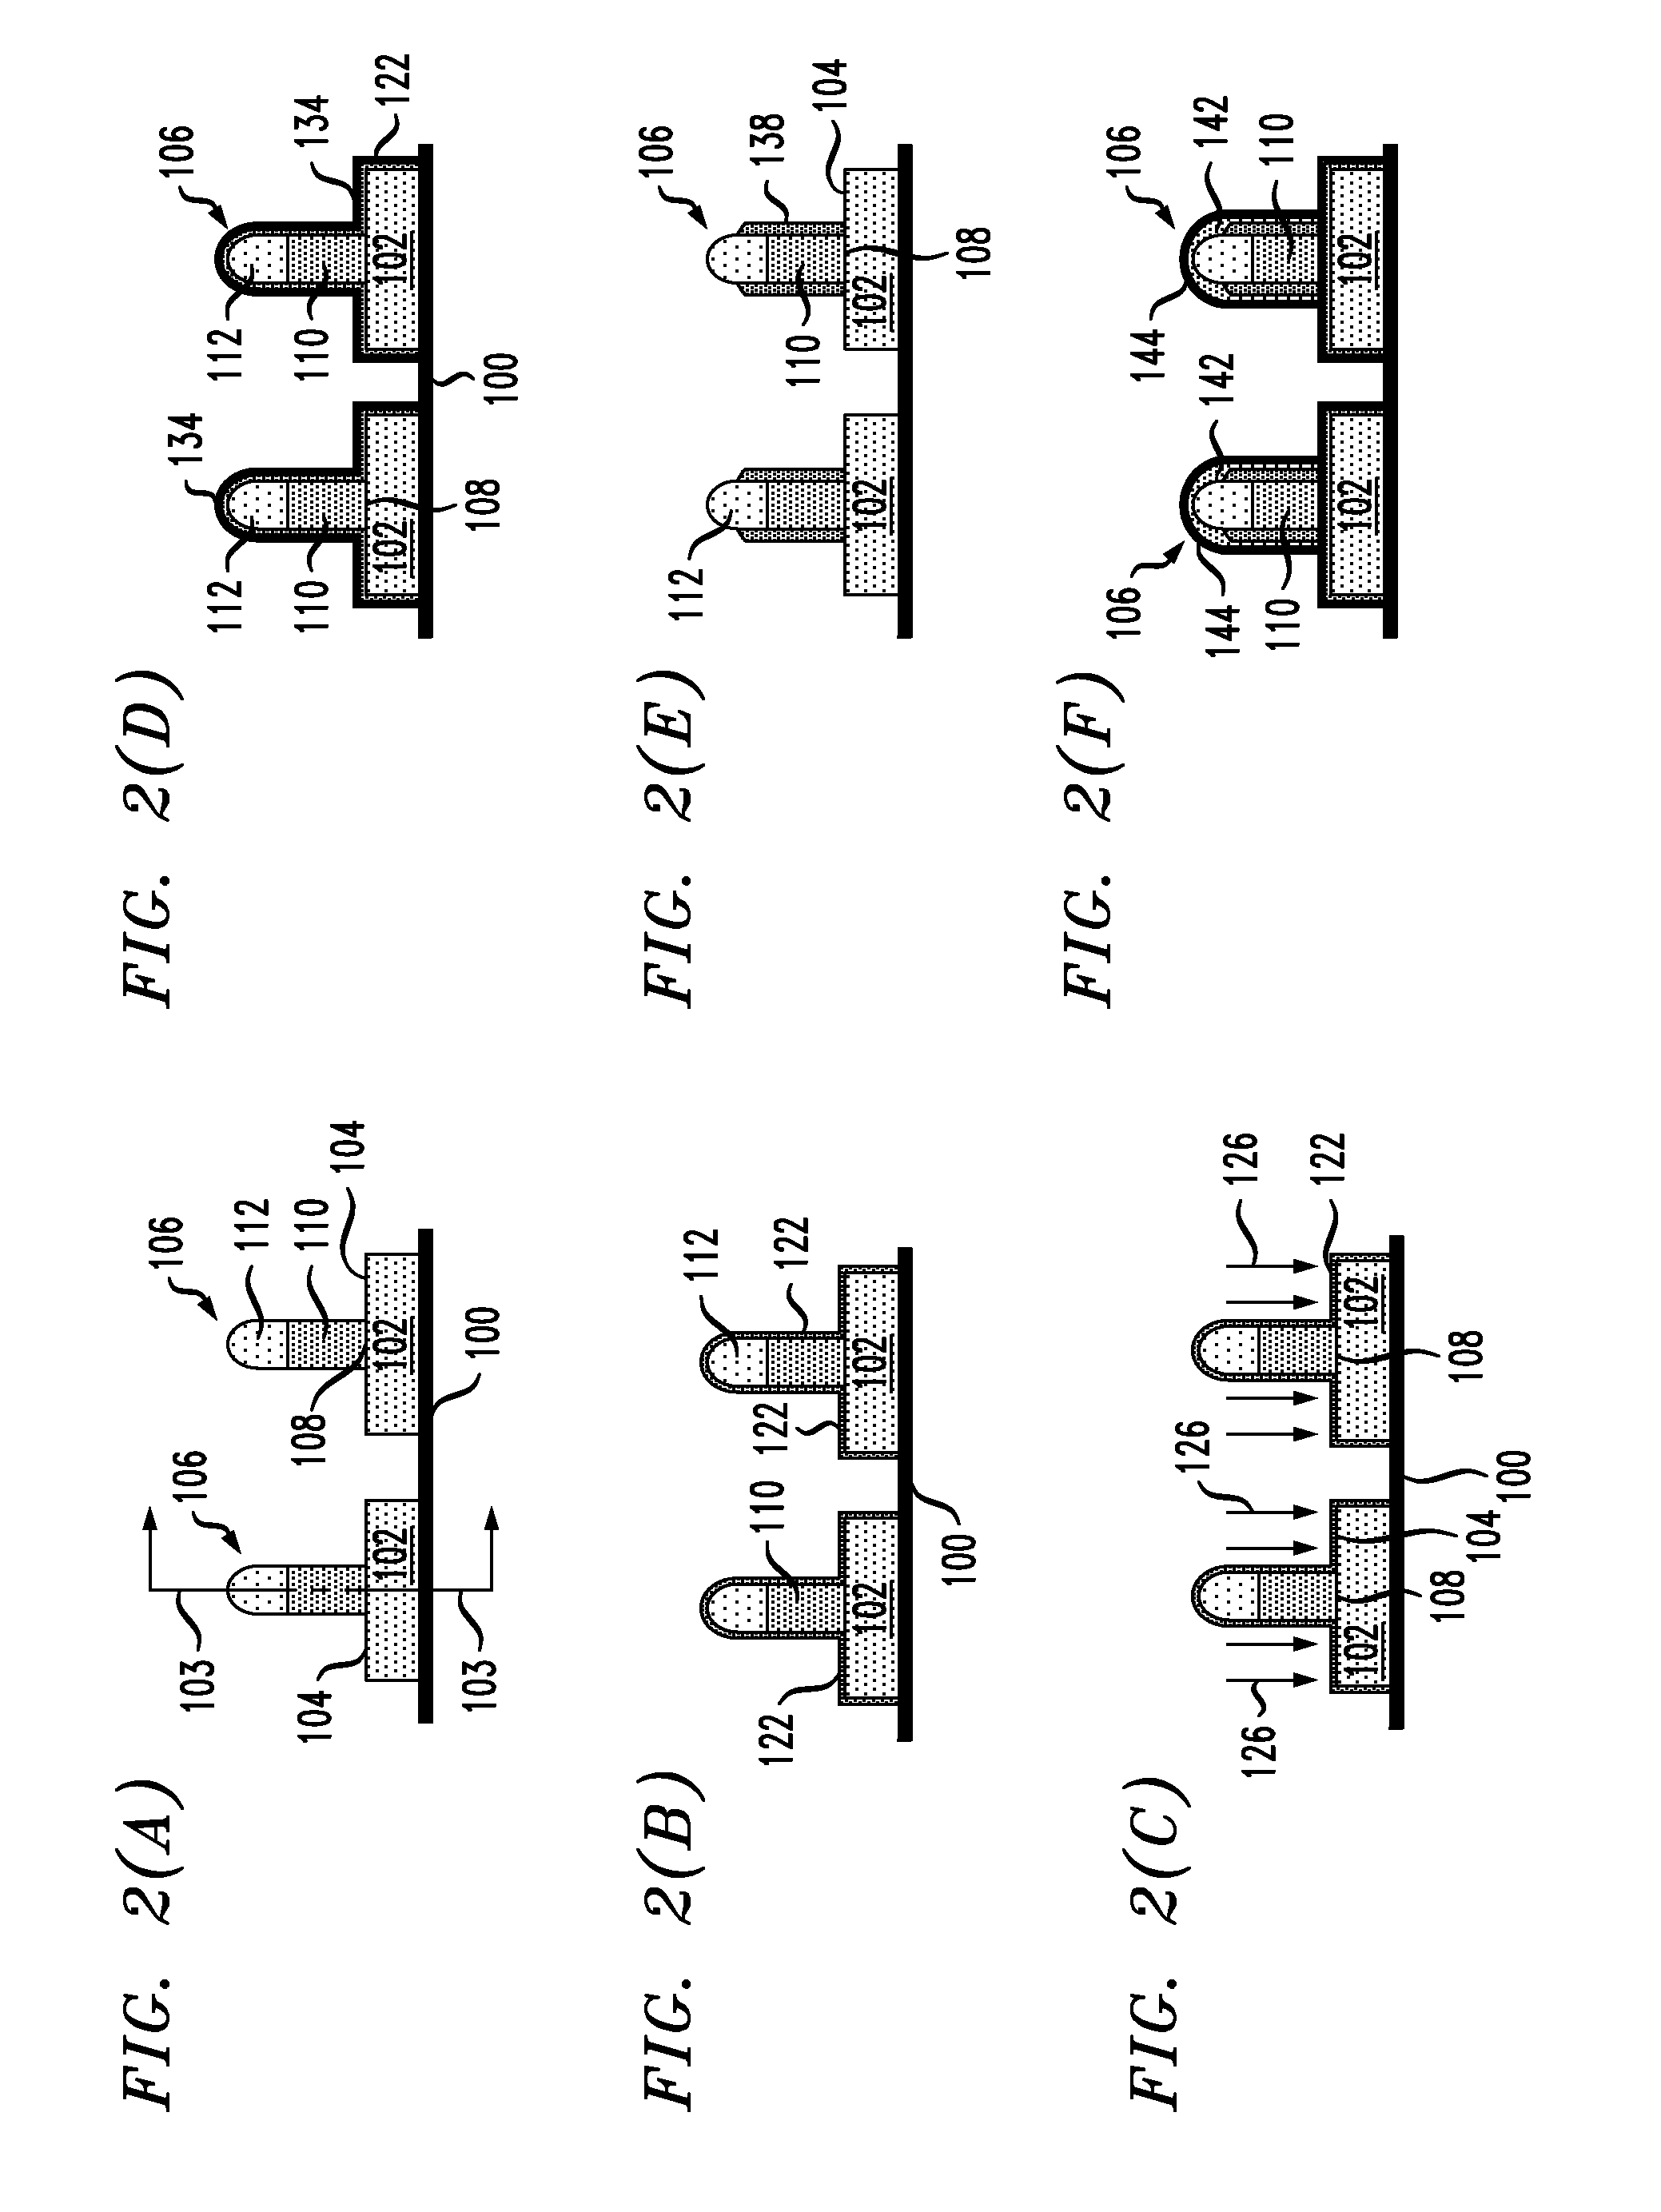 Integrated method for forming high-k metal gate finfet devices